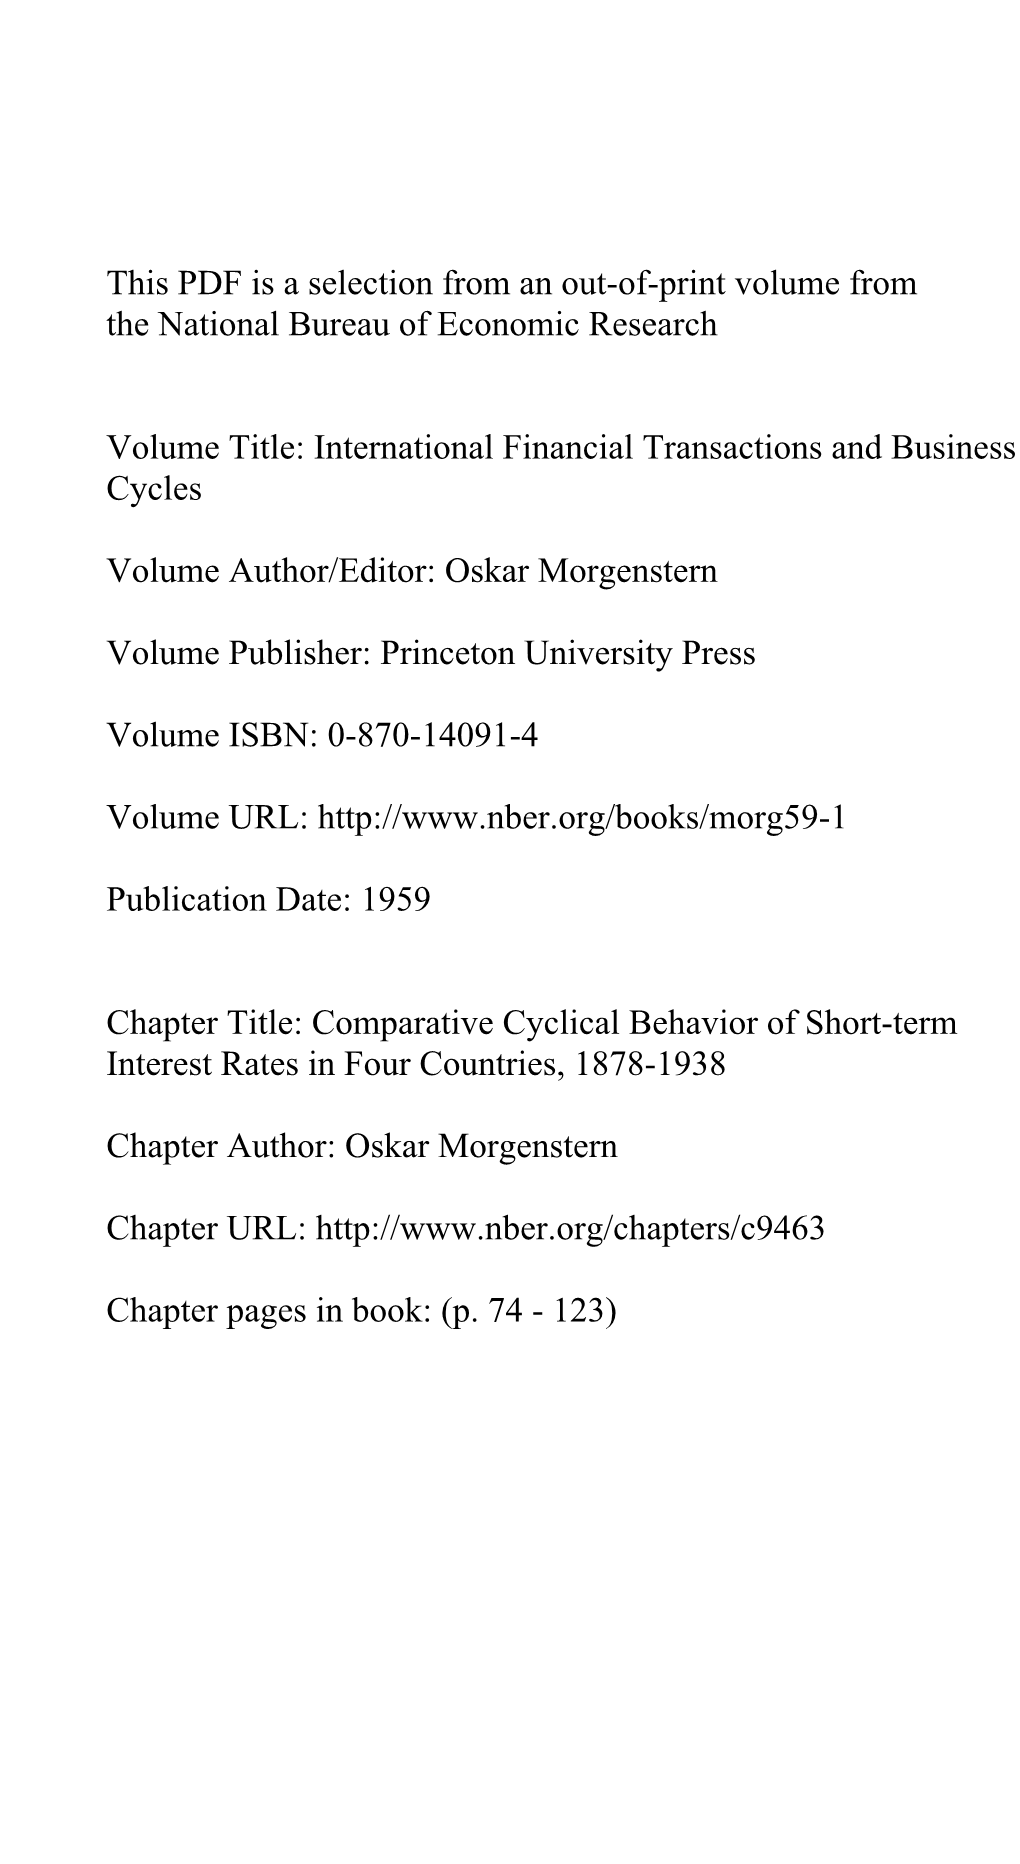 Comparative Cyclical Behavior of Short-Term Interest Rates in Four Countries, 1878-1938